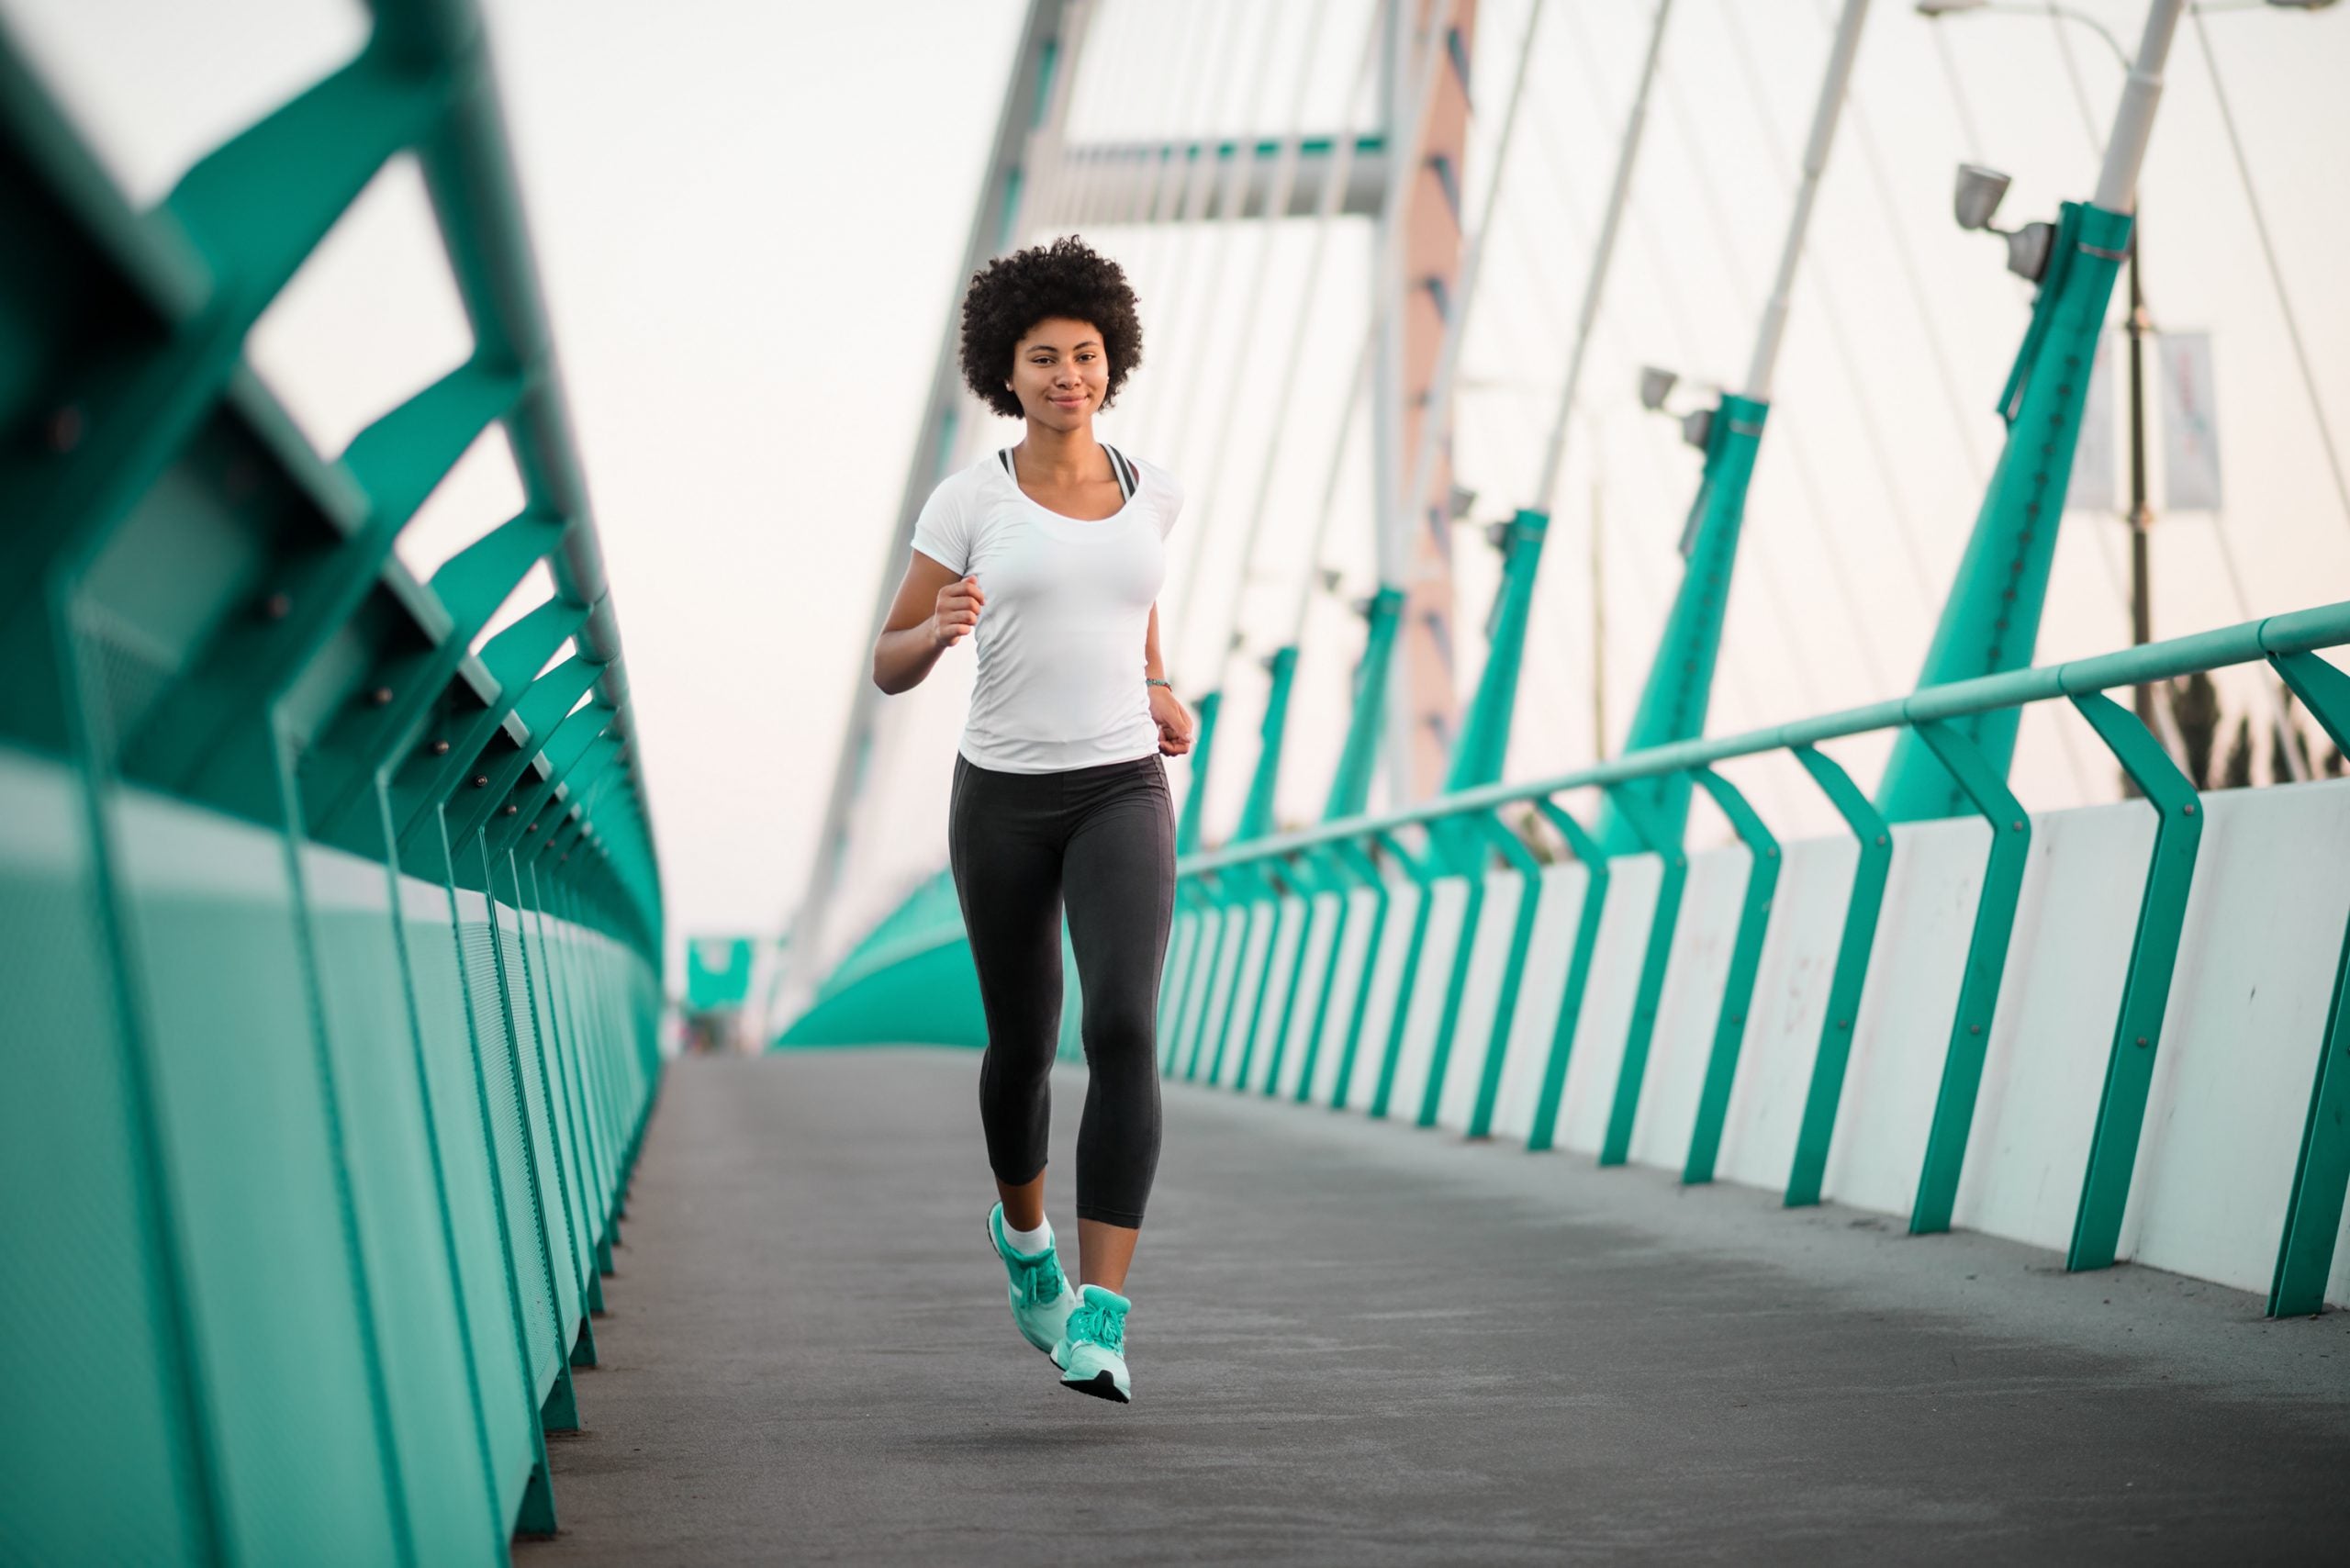 The Dos and Don’ts Of Running While Social Distancing